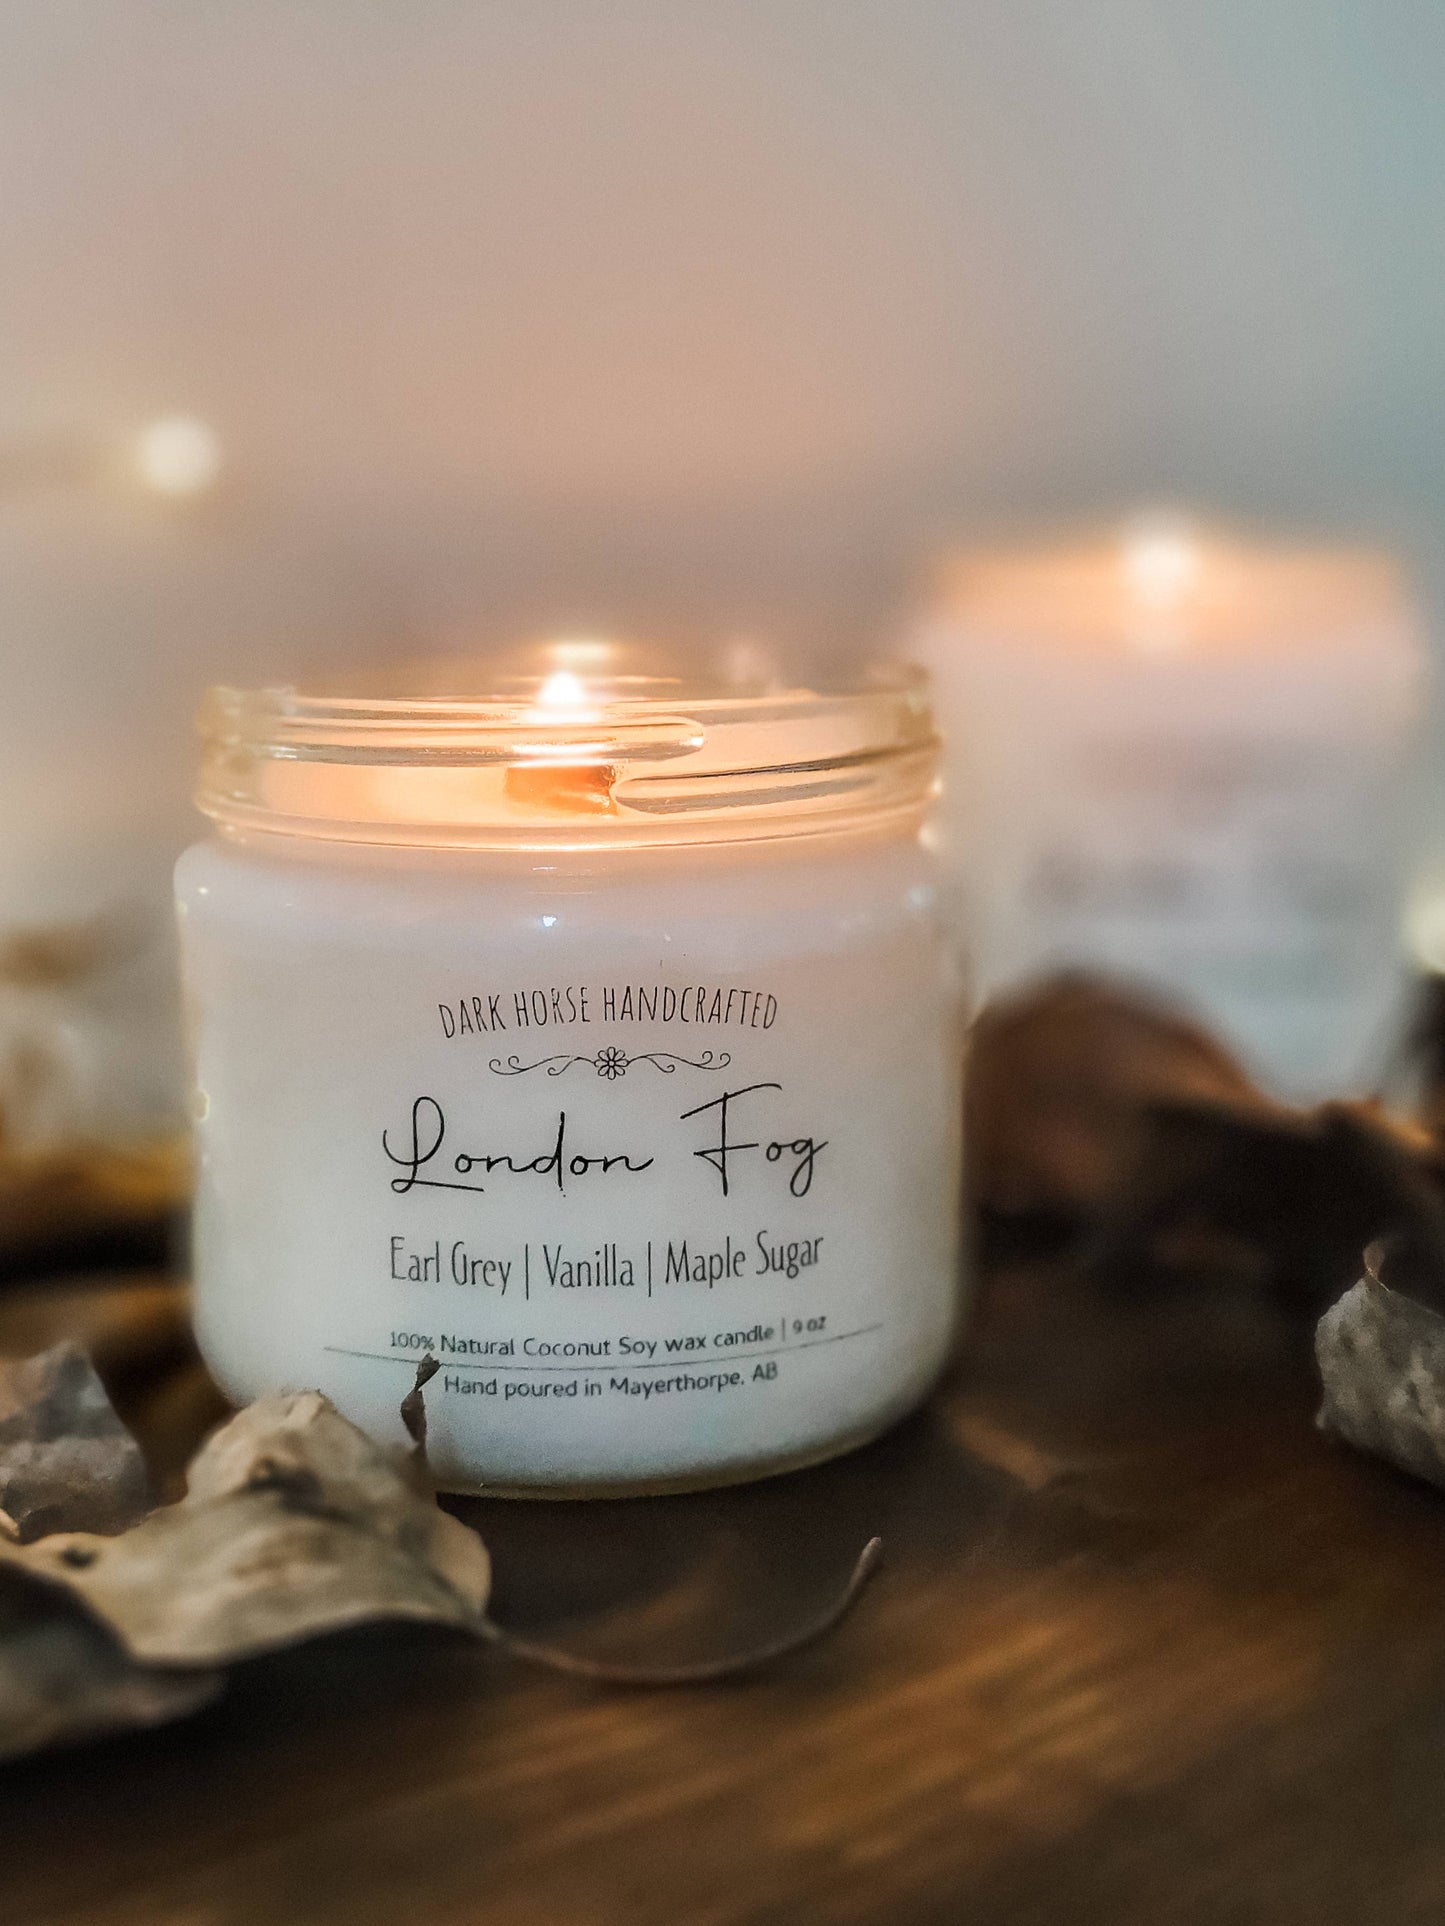 London Fog - 100% Natural Coconut Soy Wax Candle